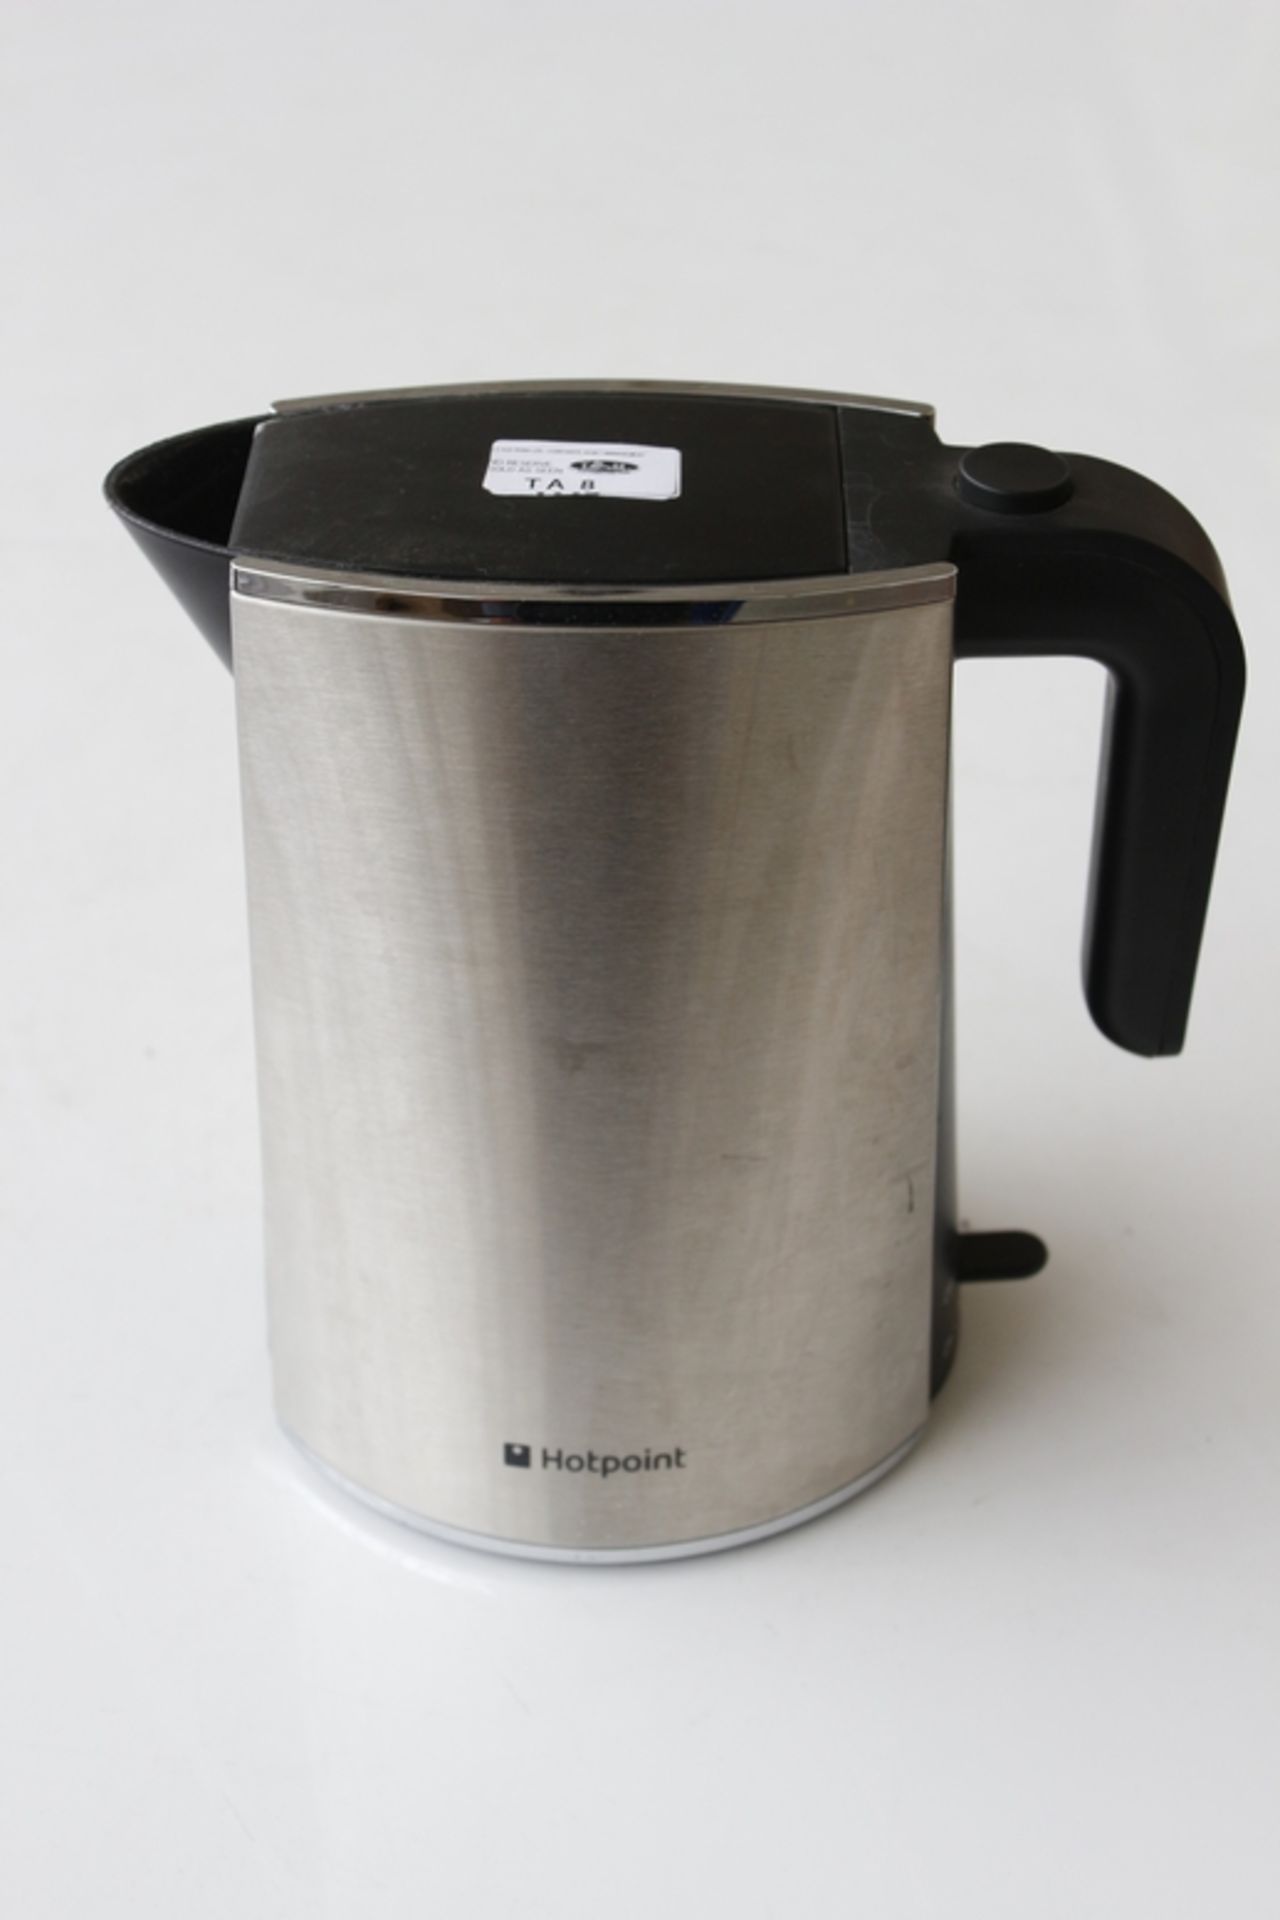 ONE HOTPOINT HDLINE KETTLE (DS-HP)